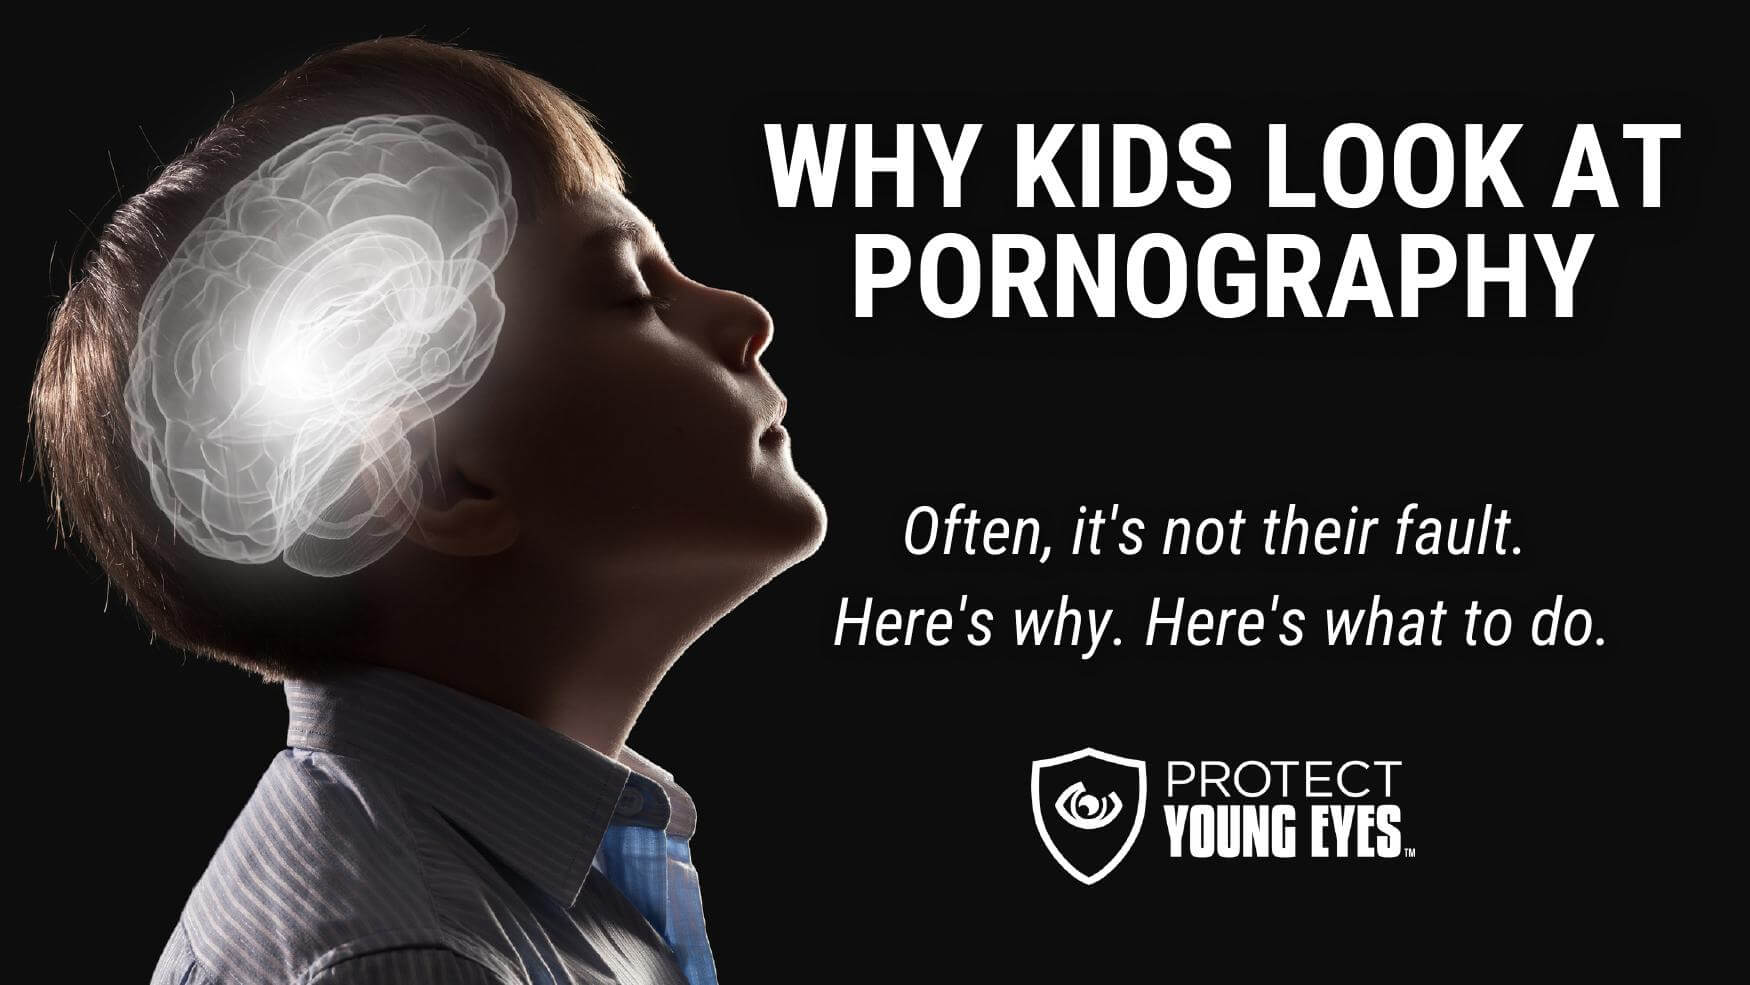 Littl Girl Looking At Porn - Why Kids Look at Pornography (It's not their fault) - Protect Young Eyes